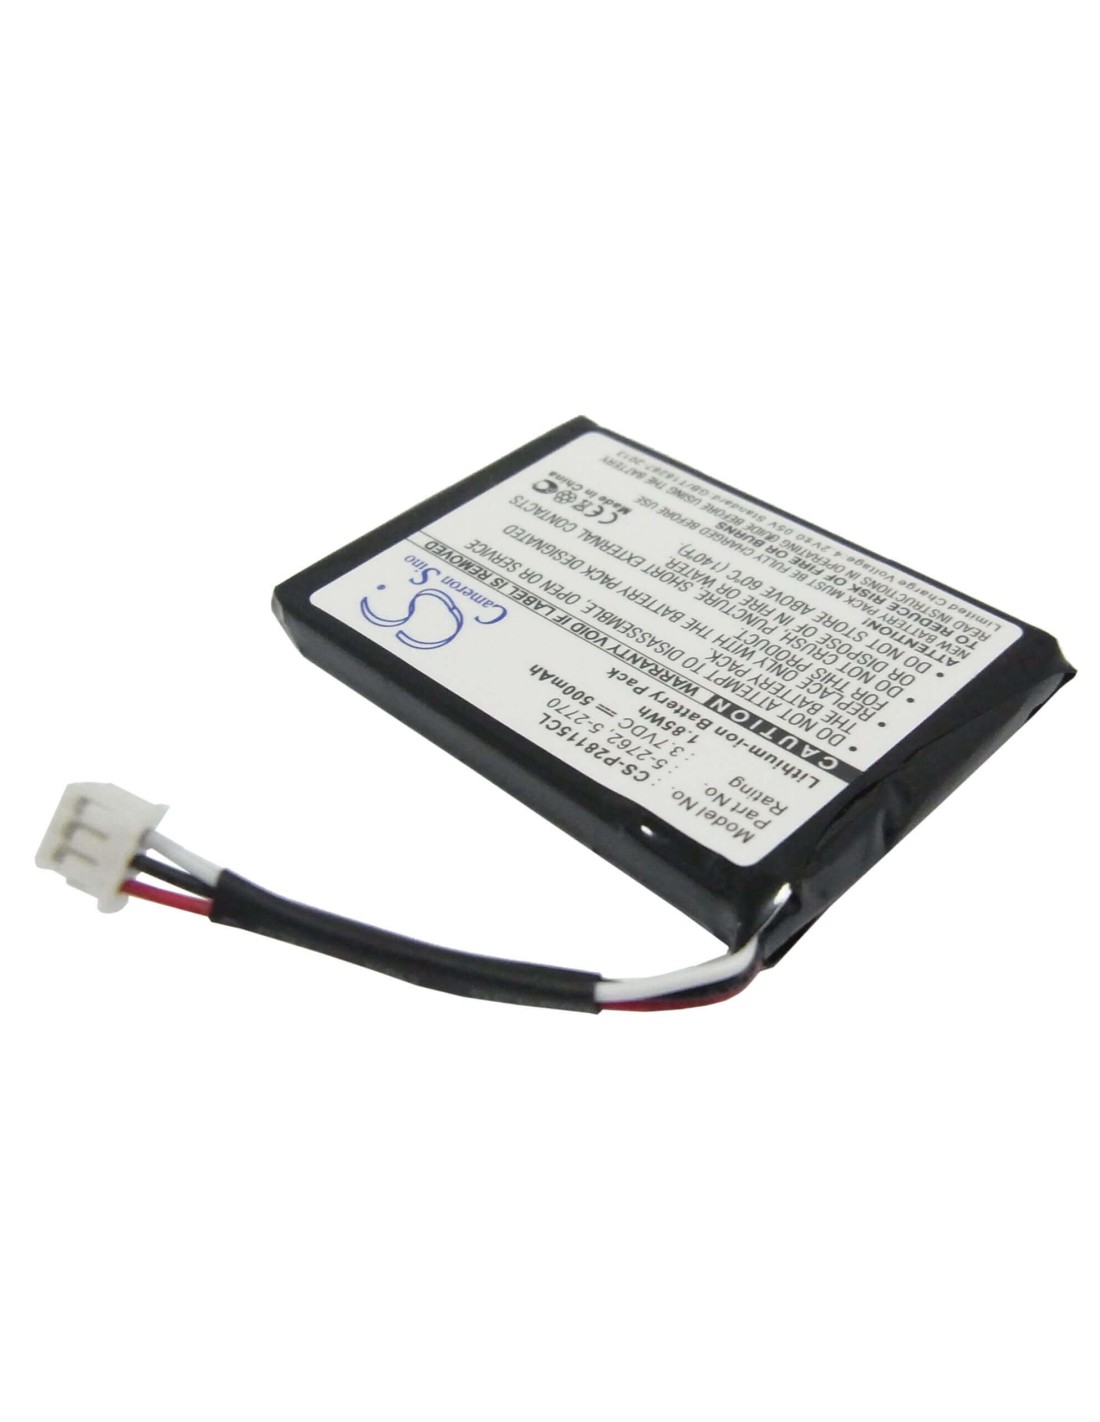 Battery for Philips, Id 555, Mc-163-500 3.7V, 500mAh - 1.85Wh